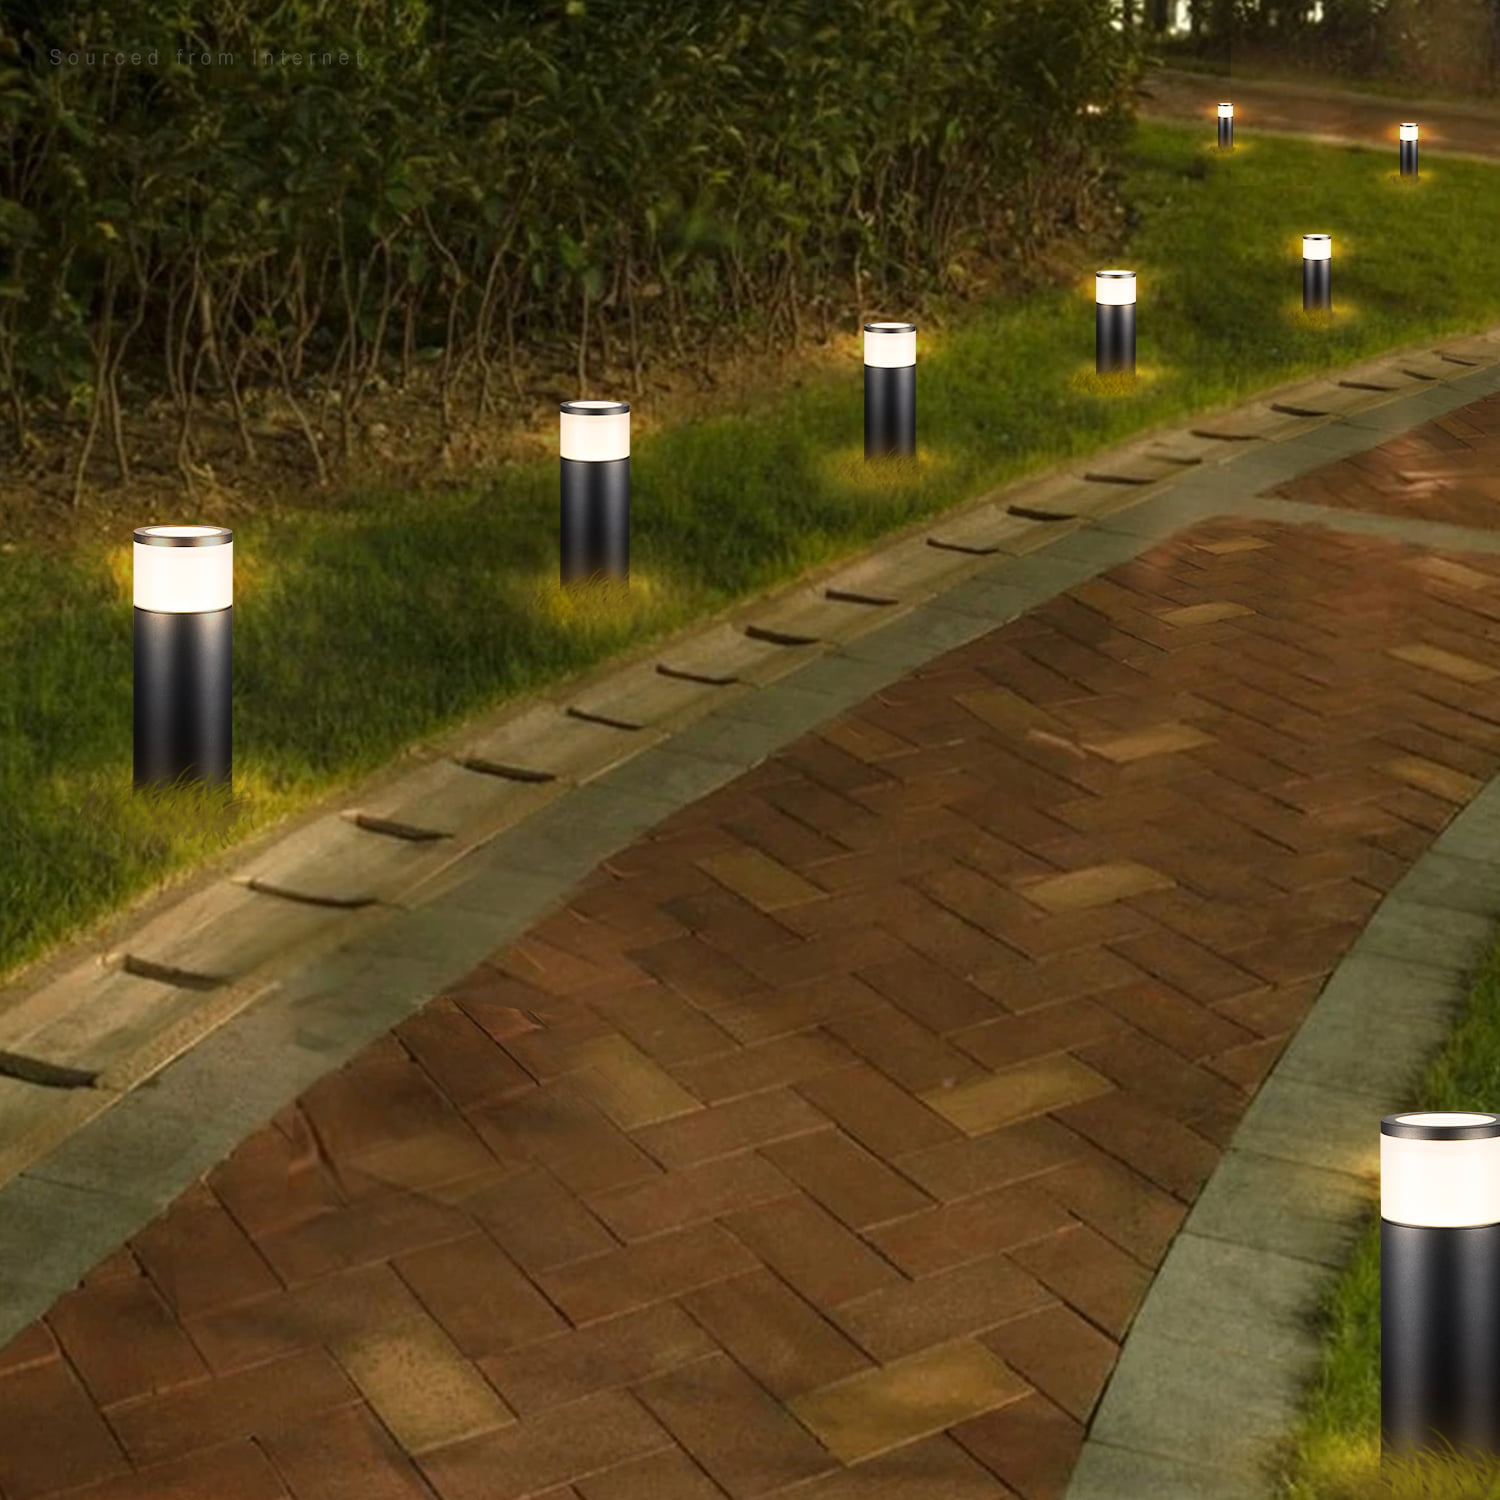 NEW NEW NEW Details about   Landscaping LED light kit 